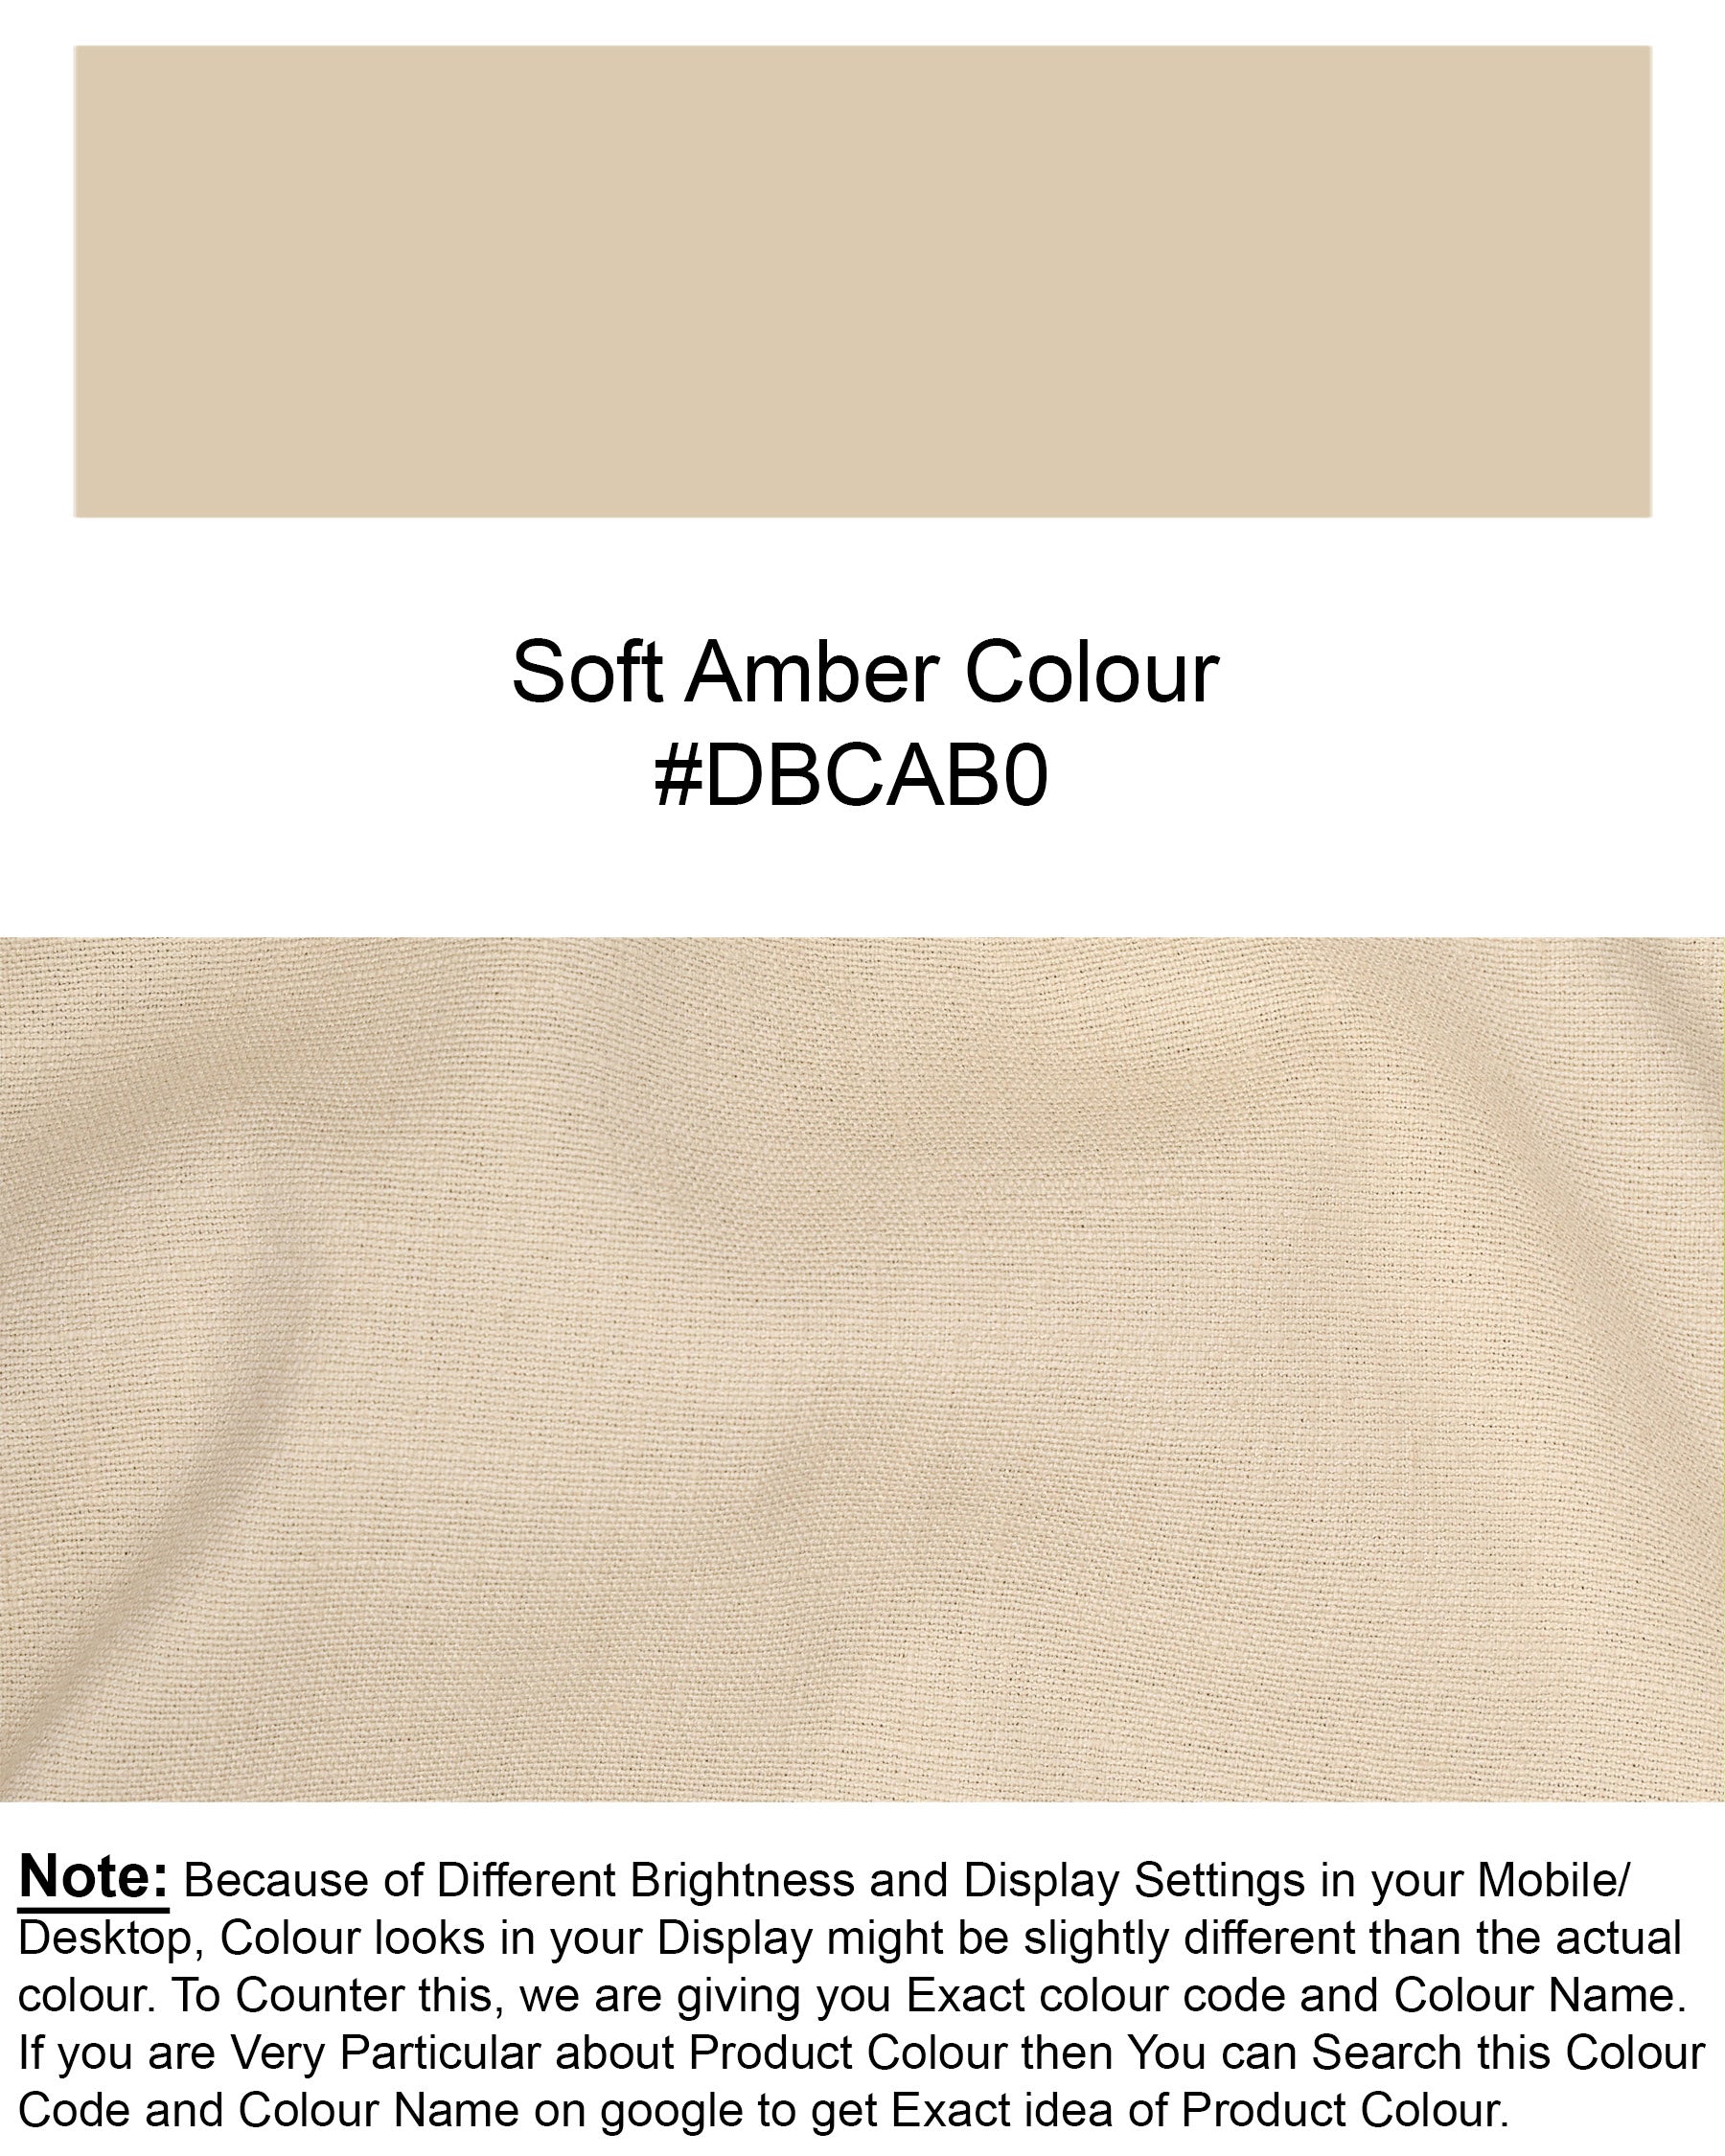 Soft Amber Double Breasted Premium Cotton Suit ST1608-DB-36, ST1608-DB-38, ST1608-DB-40, ST1608-DB-42, ST1608-DB-44, ST1608-DB-46, ST1608-DB-48, ST1608-DB-50, ST1608-DB-52, ST1608-DB-54, ST1608-DB-56, ST1608-DB-58, ST1608-DB-60